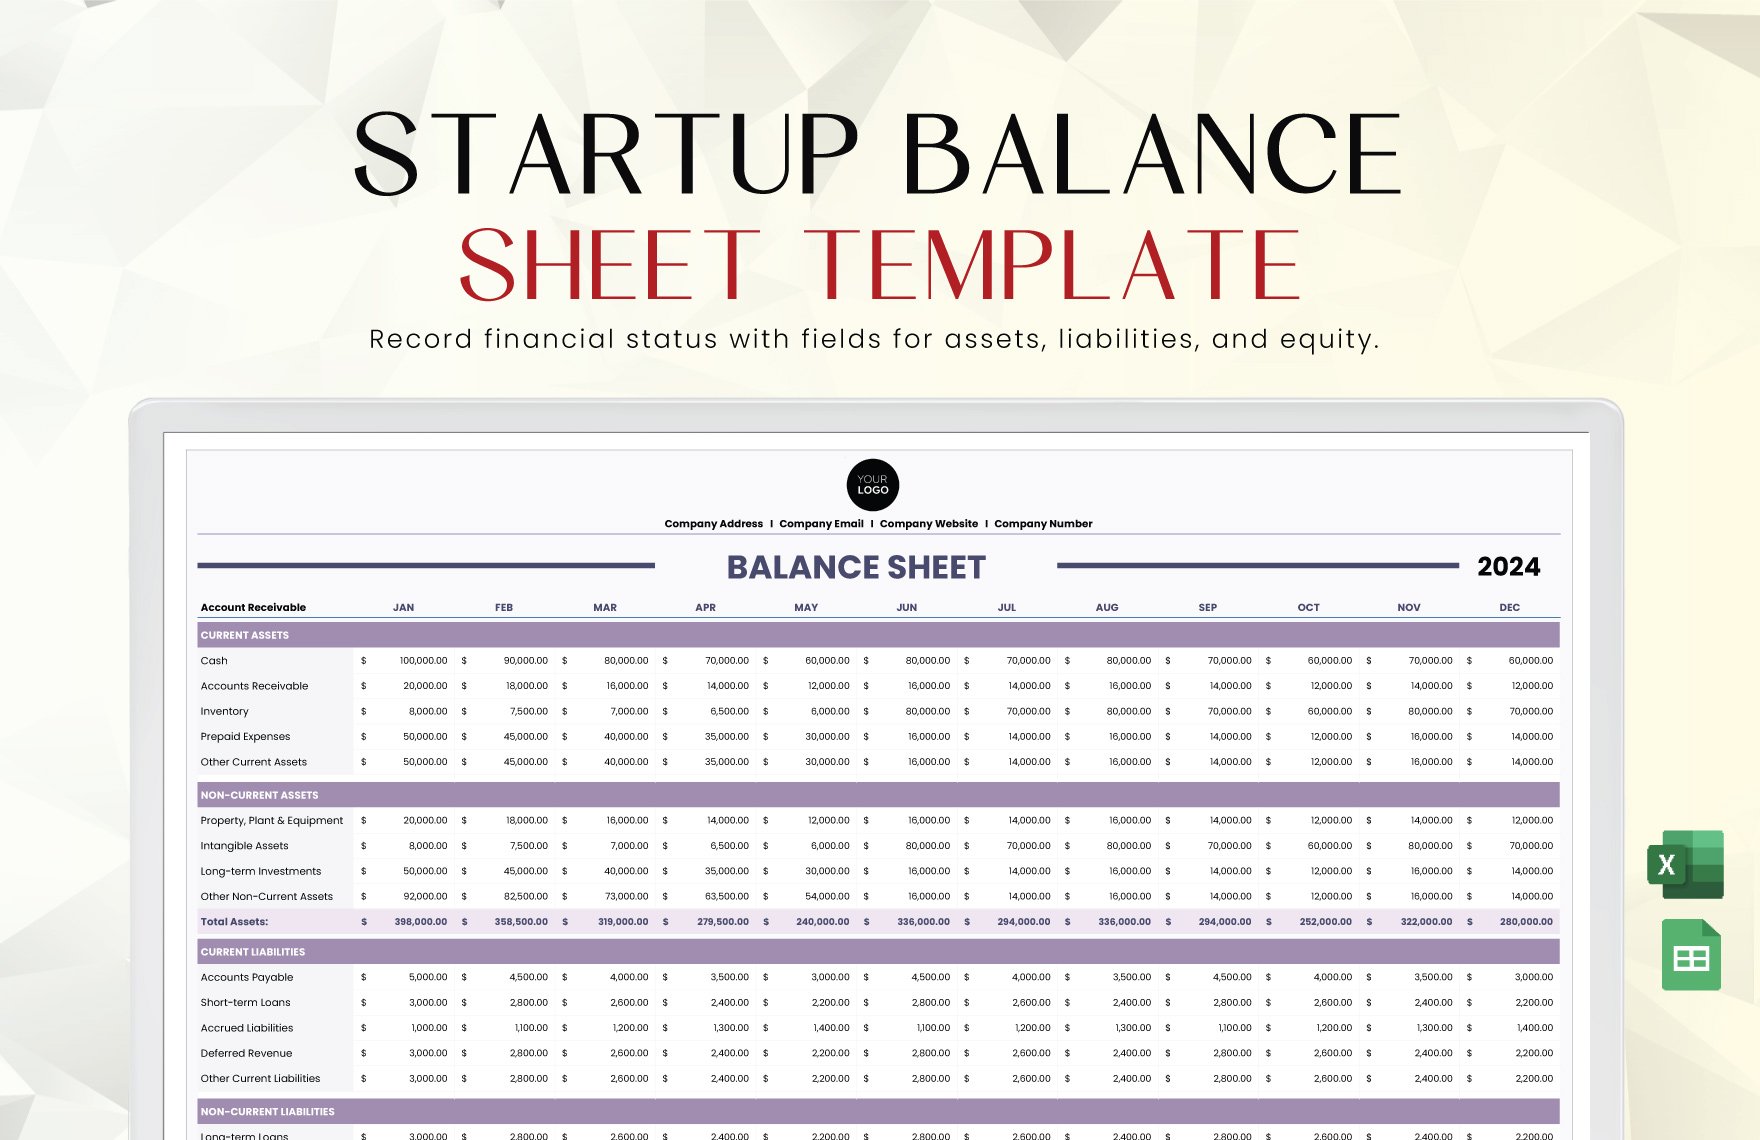 Startup Balance Sheet Template in Excel, Google Sheets